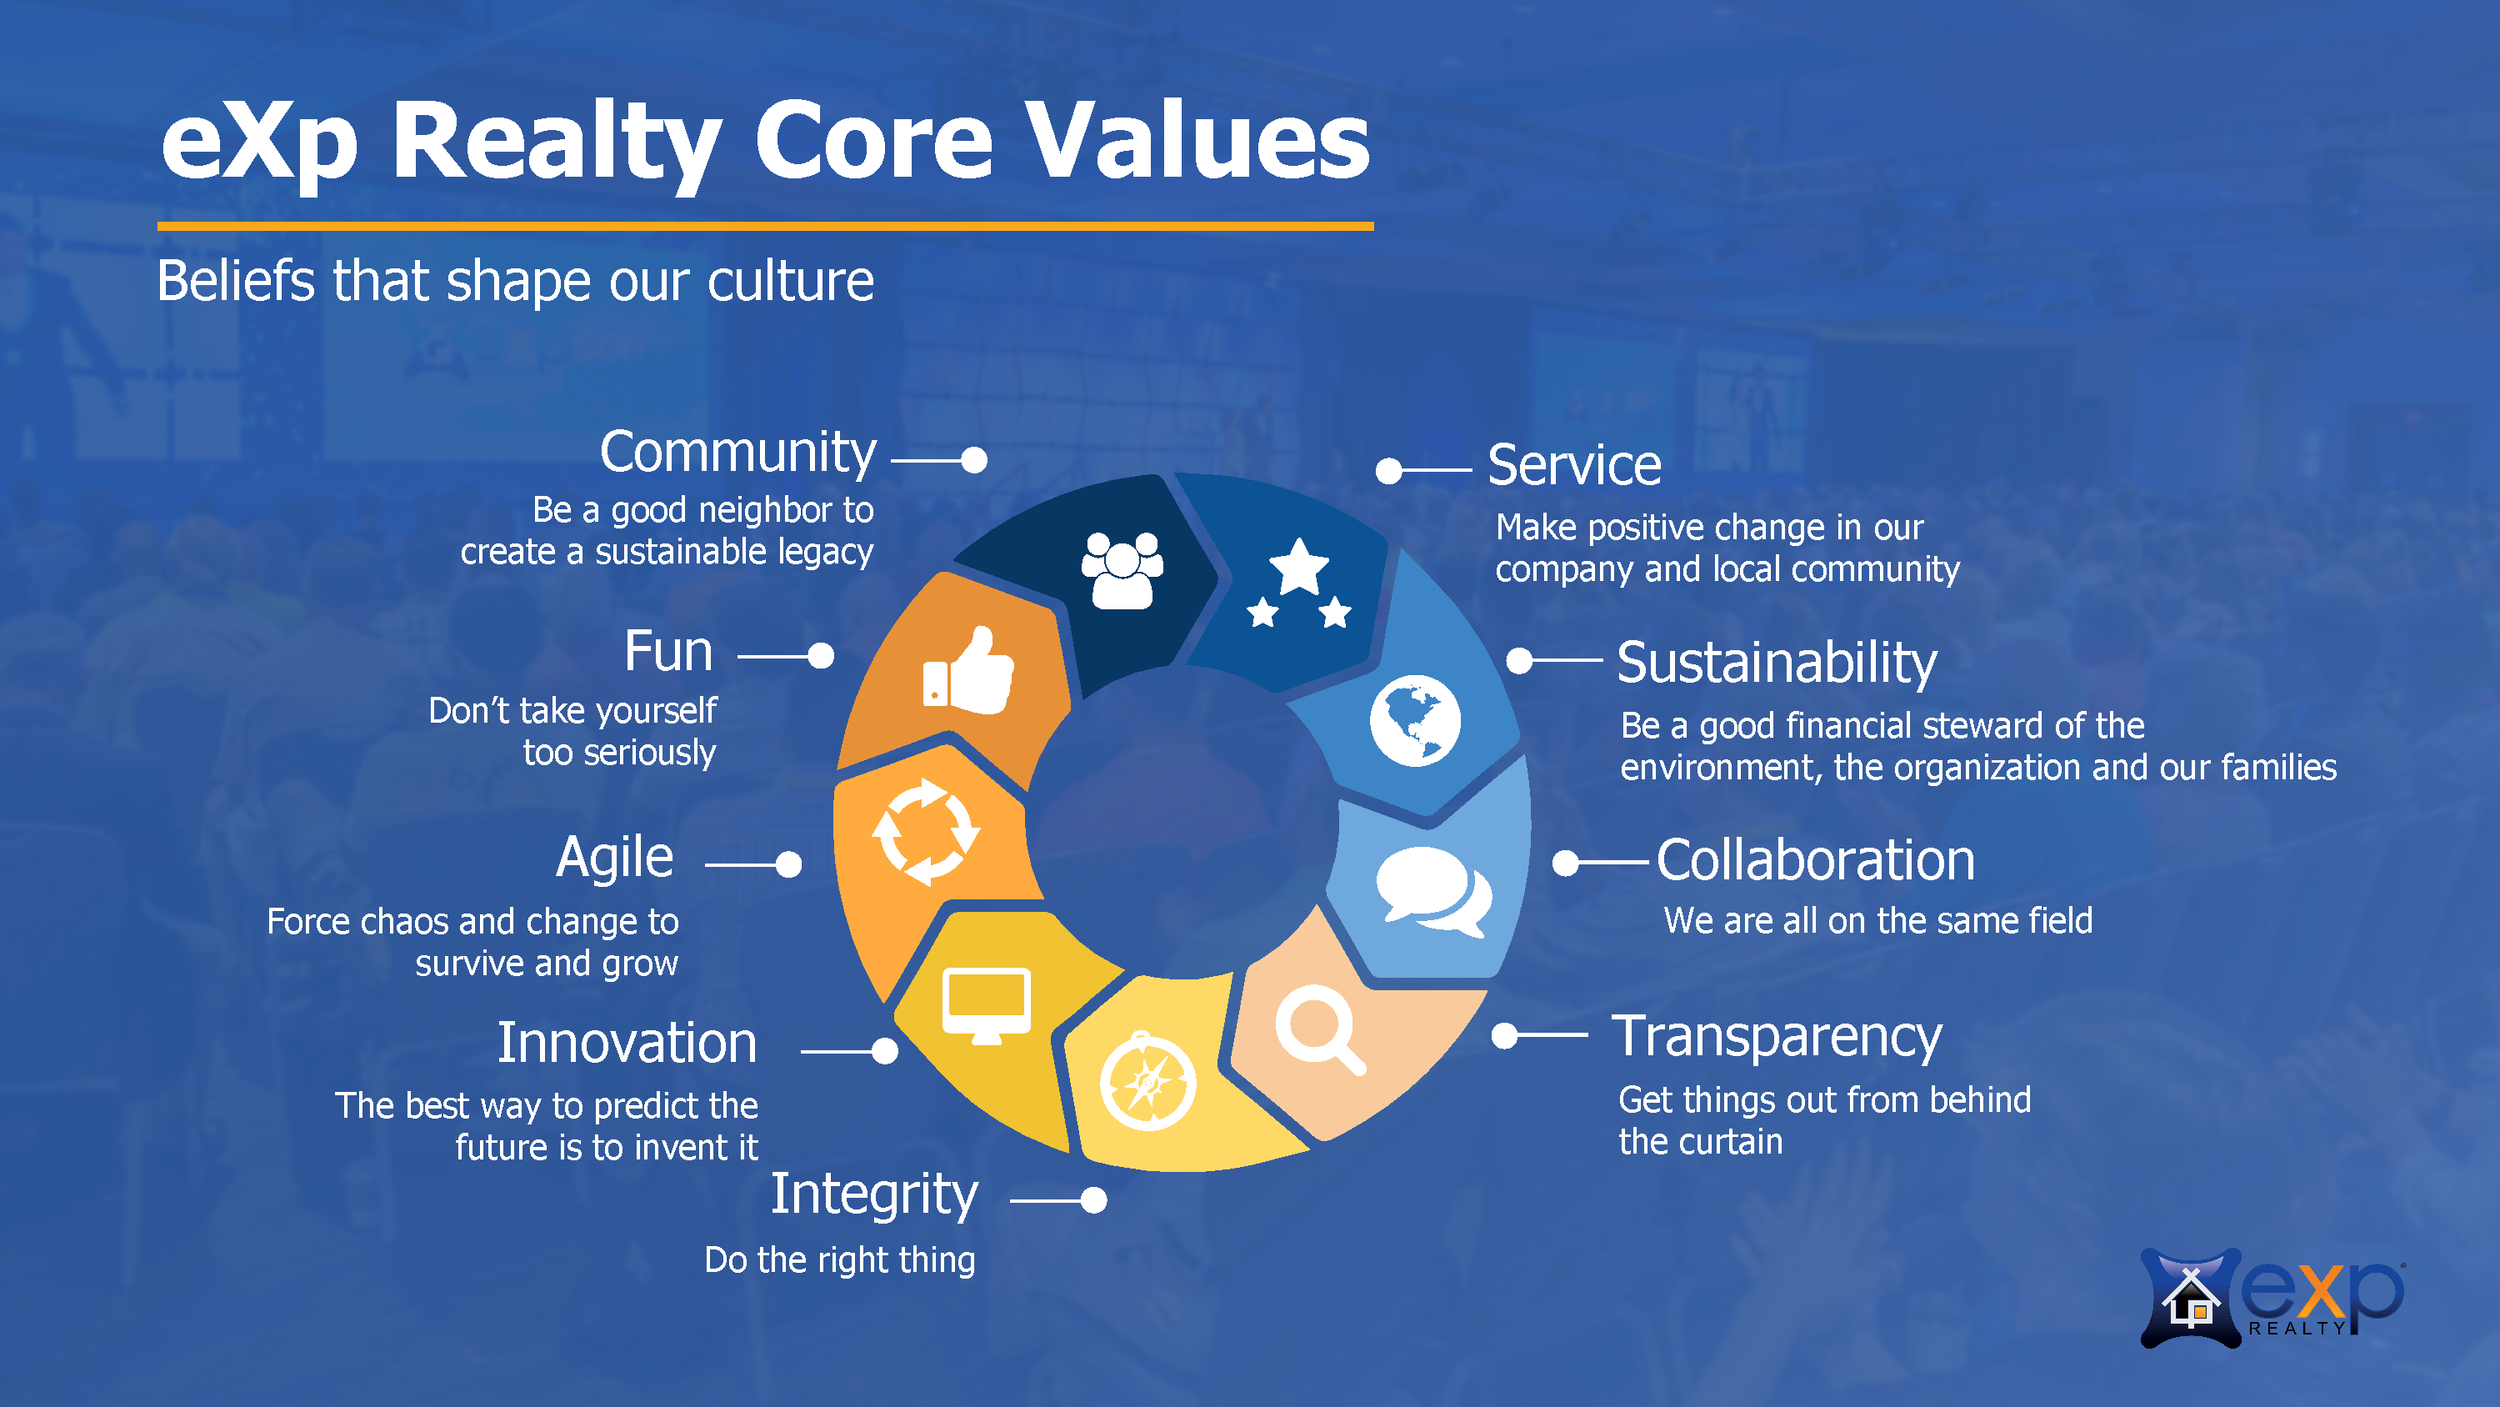 Values yes values. Core values. Exp Realty. Values are. Core Valuation.